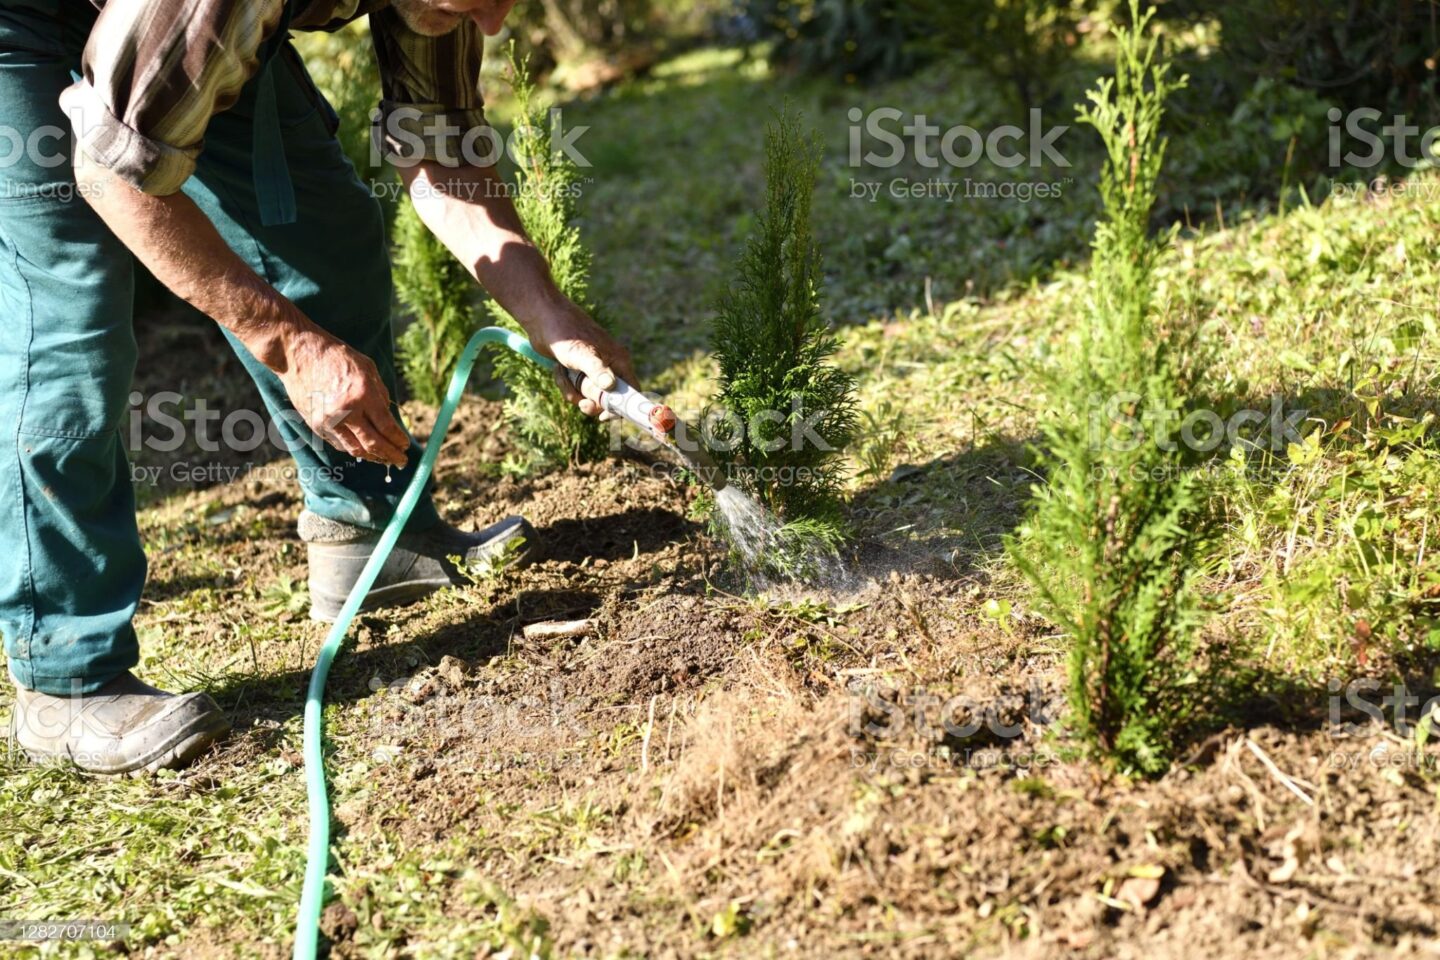 Irrigation Of Ornamental Shrubs In The Garden By Hose And Spray Gun